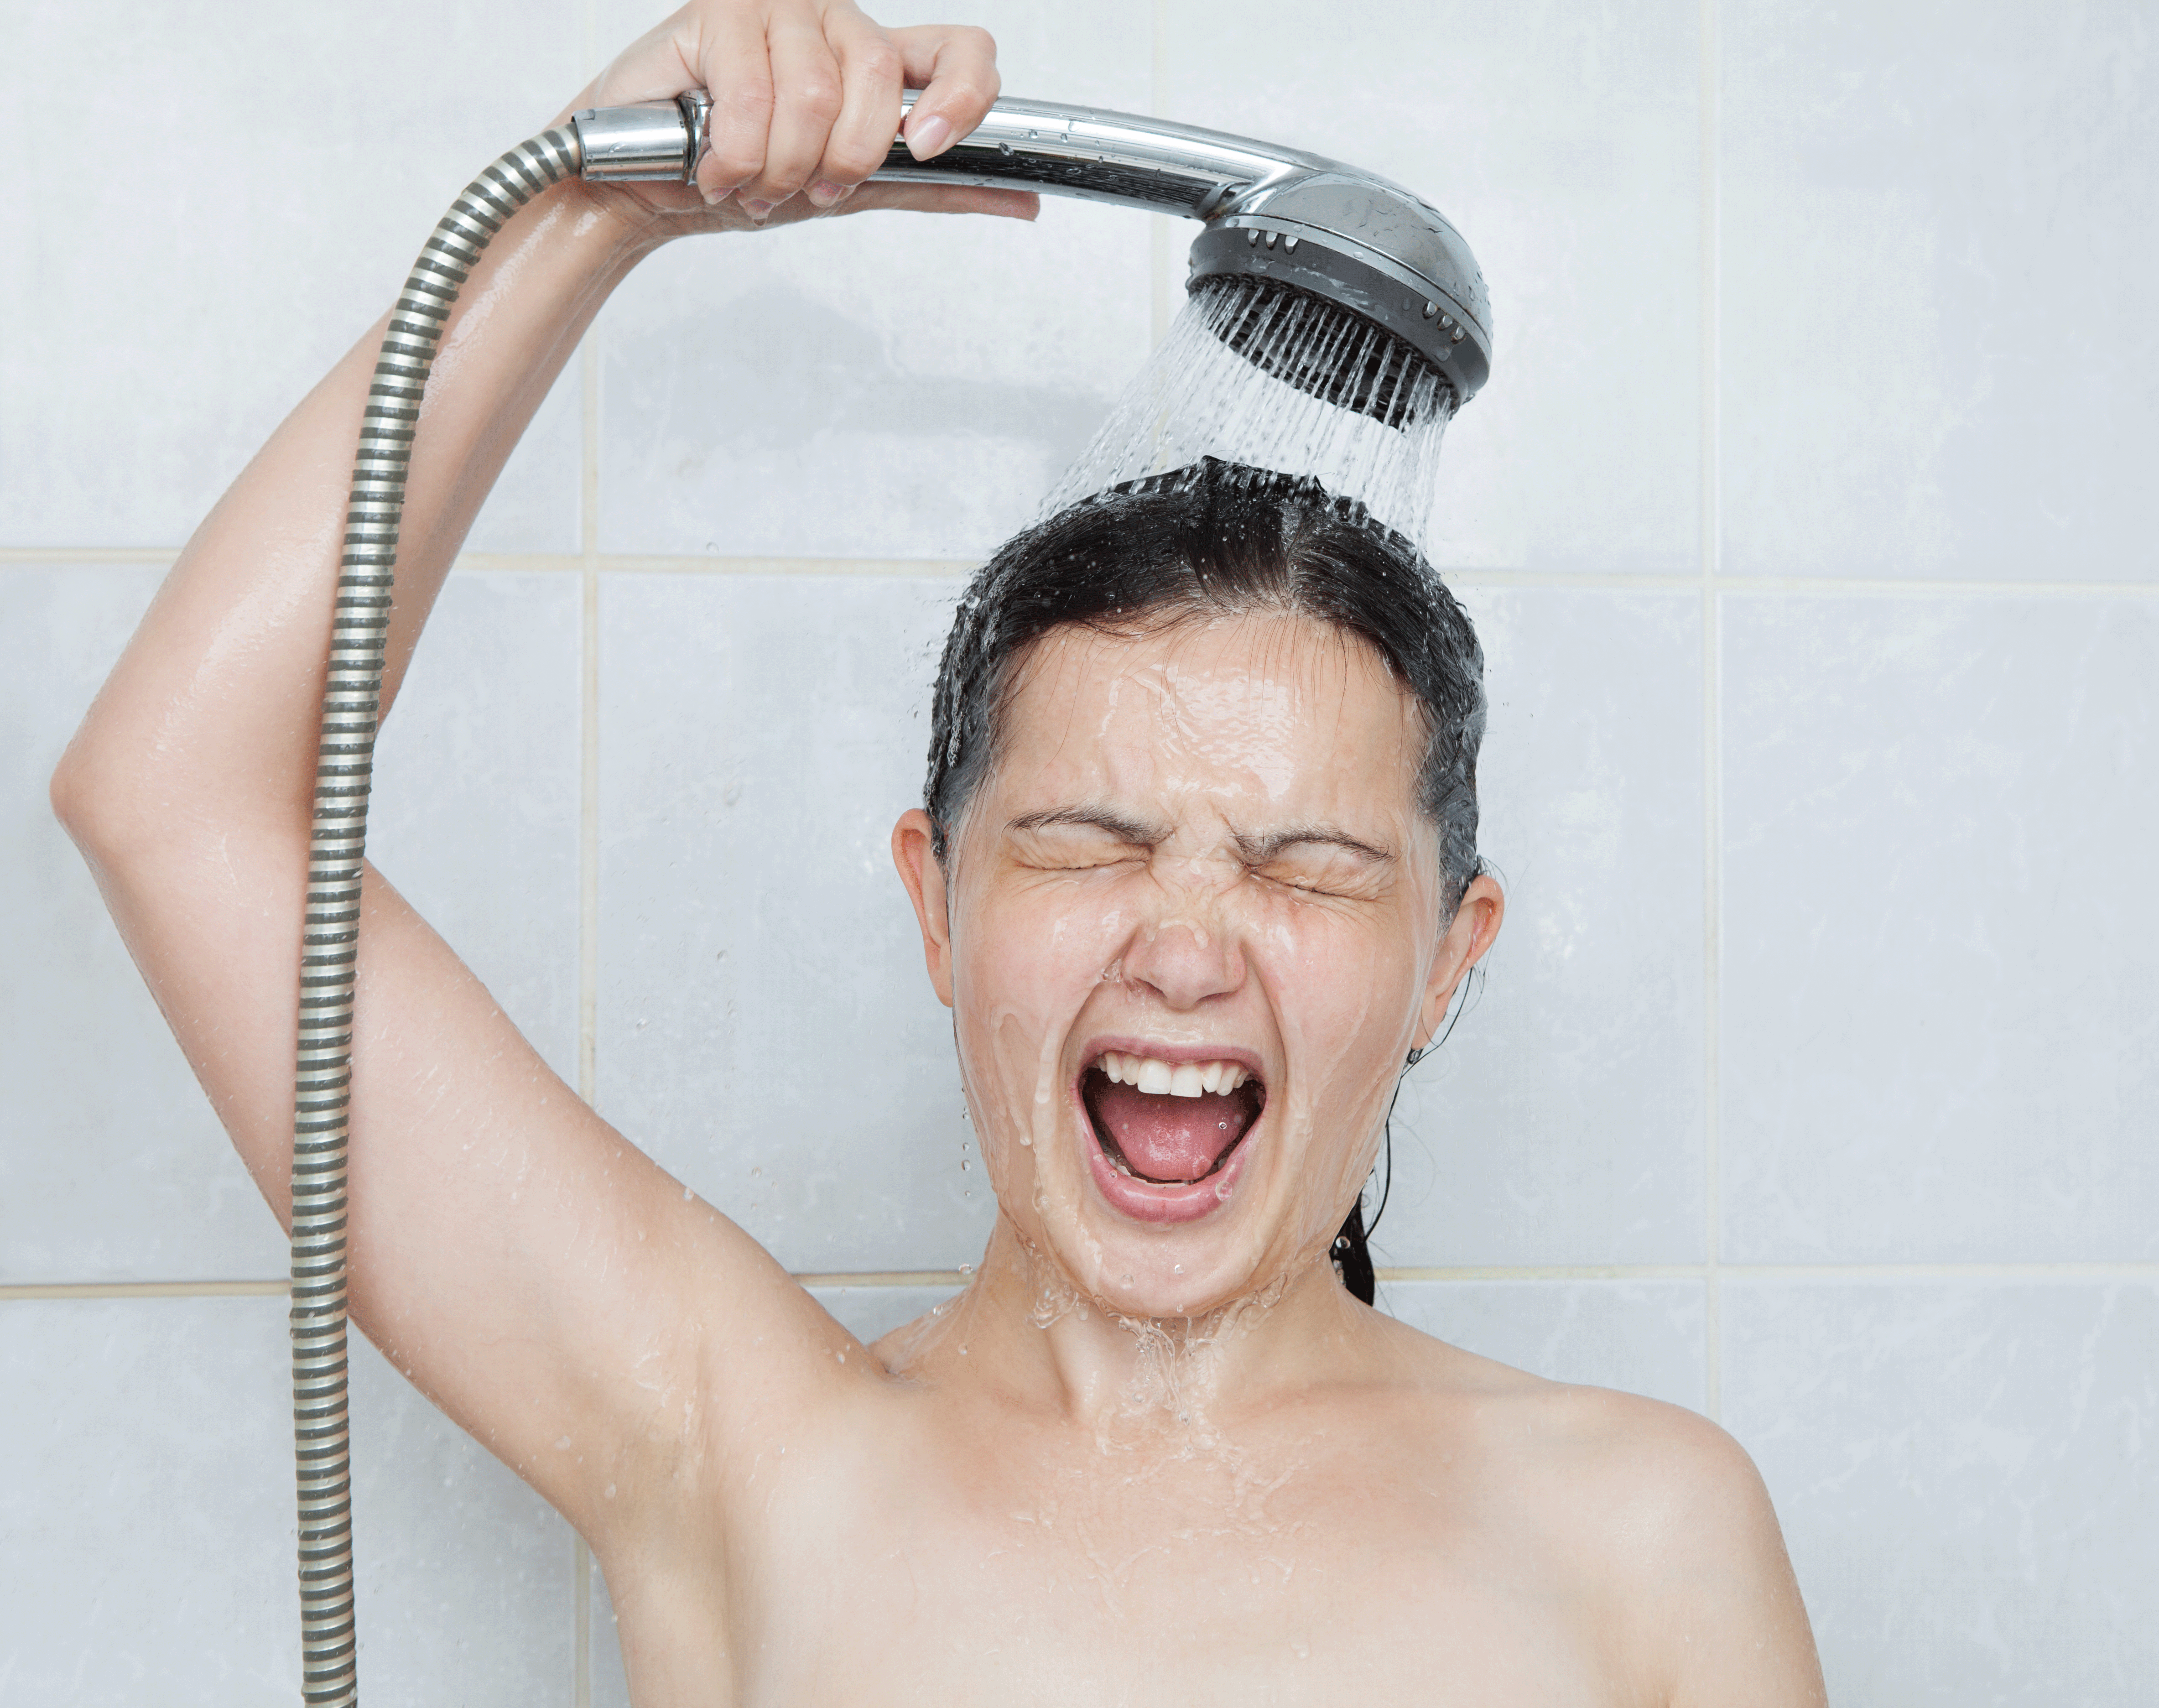 Have you tried the Cold shower ?